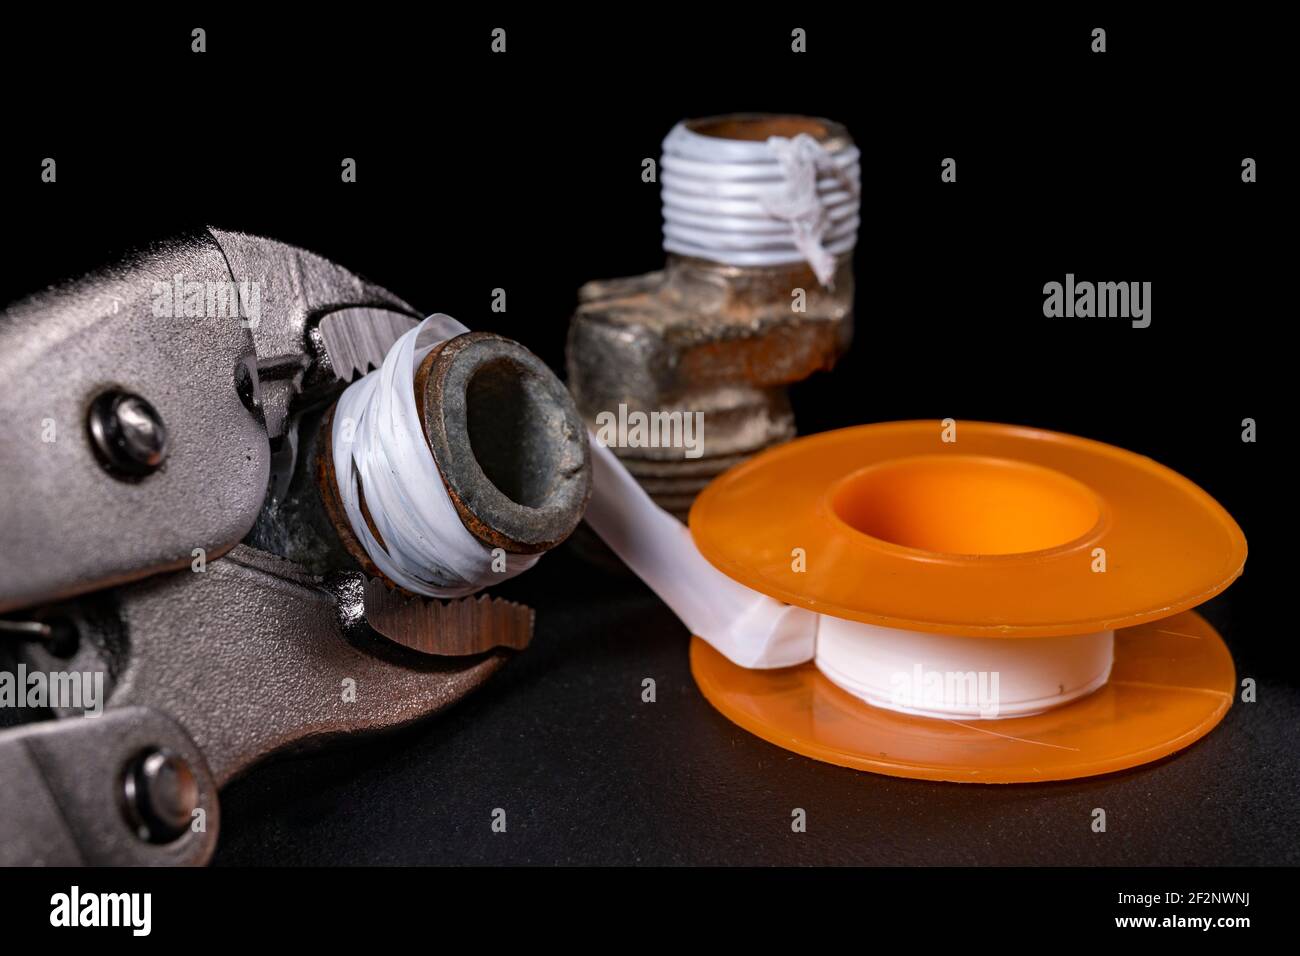 Plumbing fittings and accessories. Pipe connections with Teflon tape. Dark background. Stock Photo